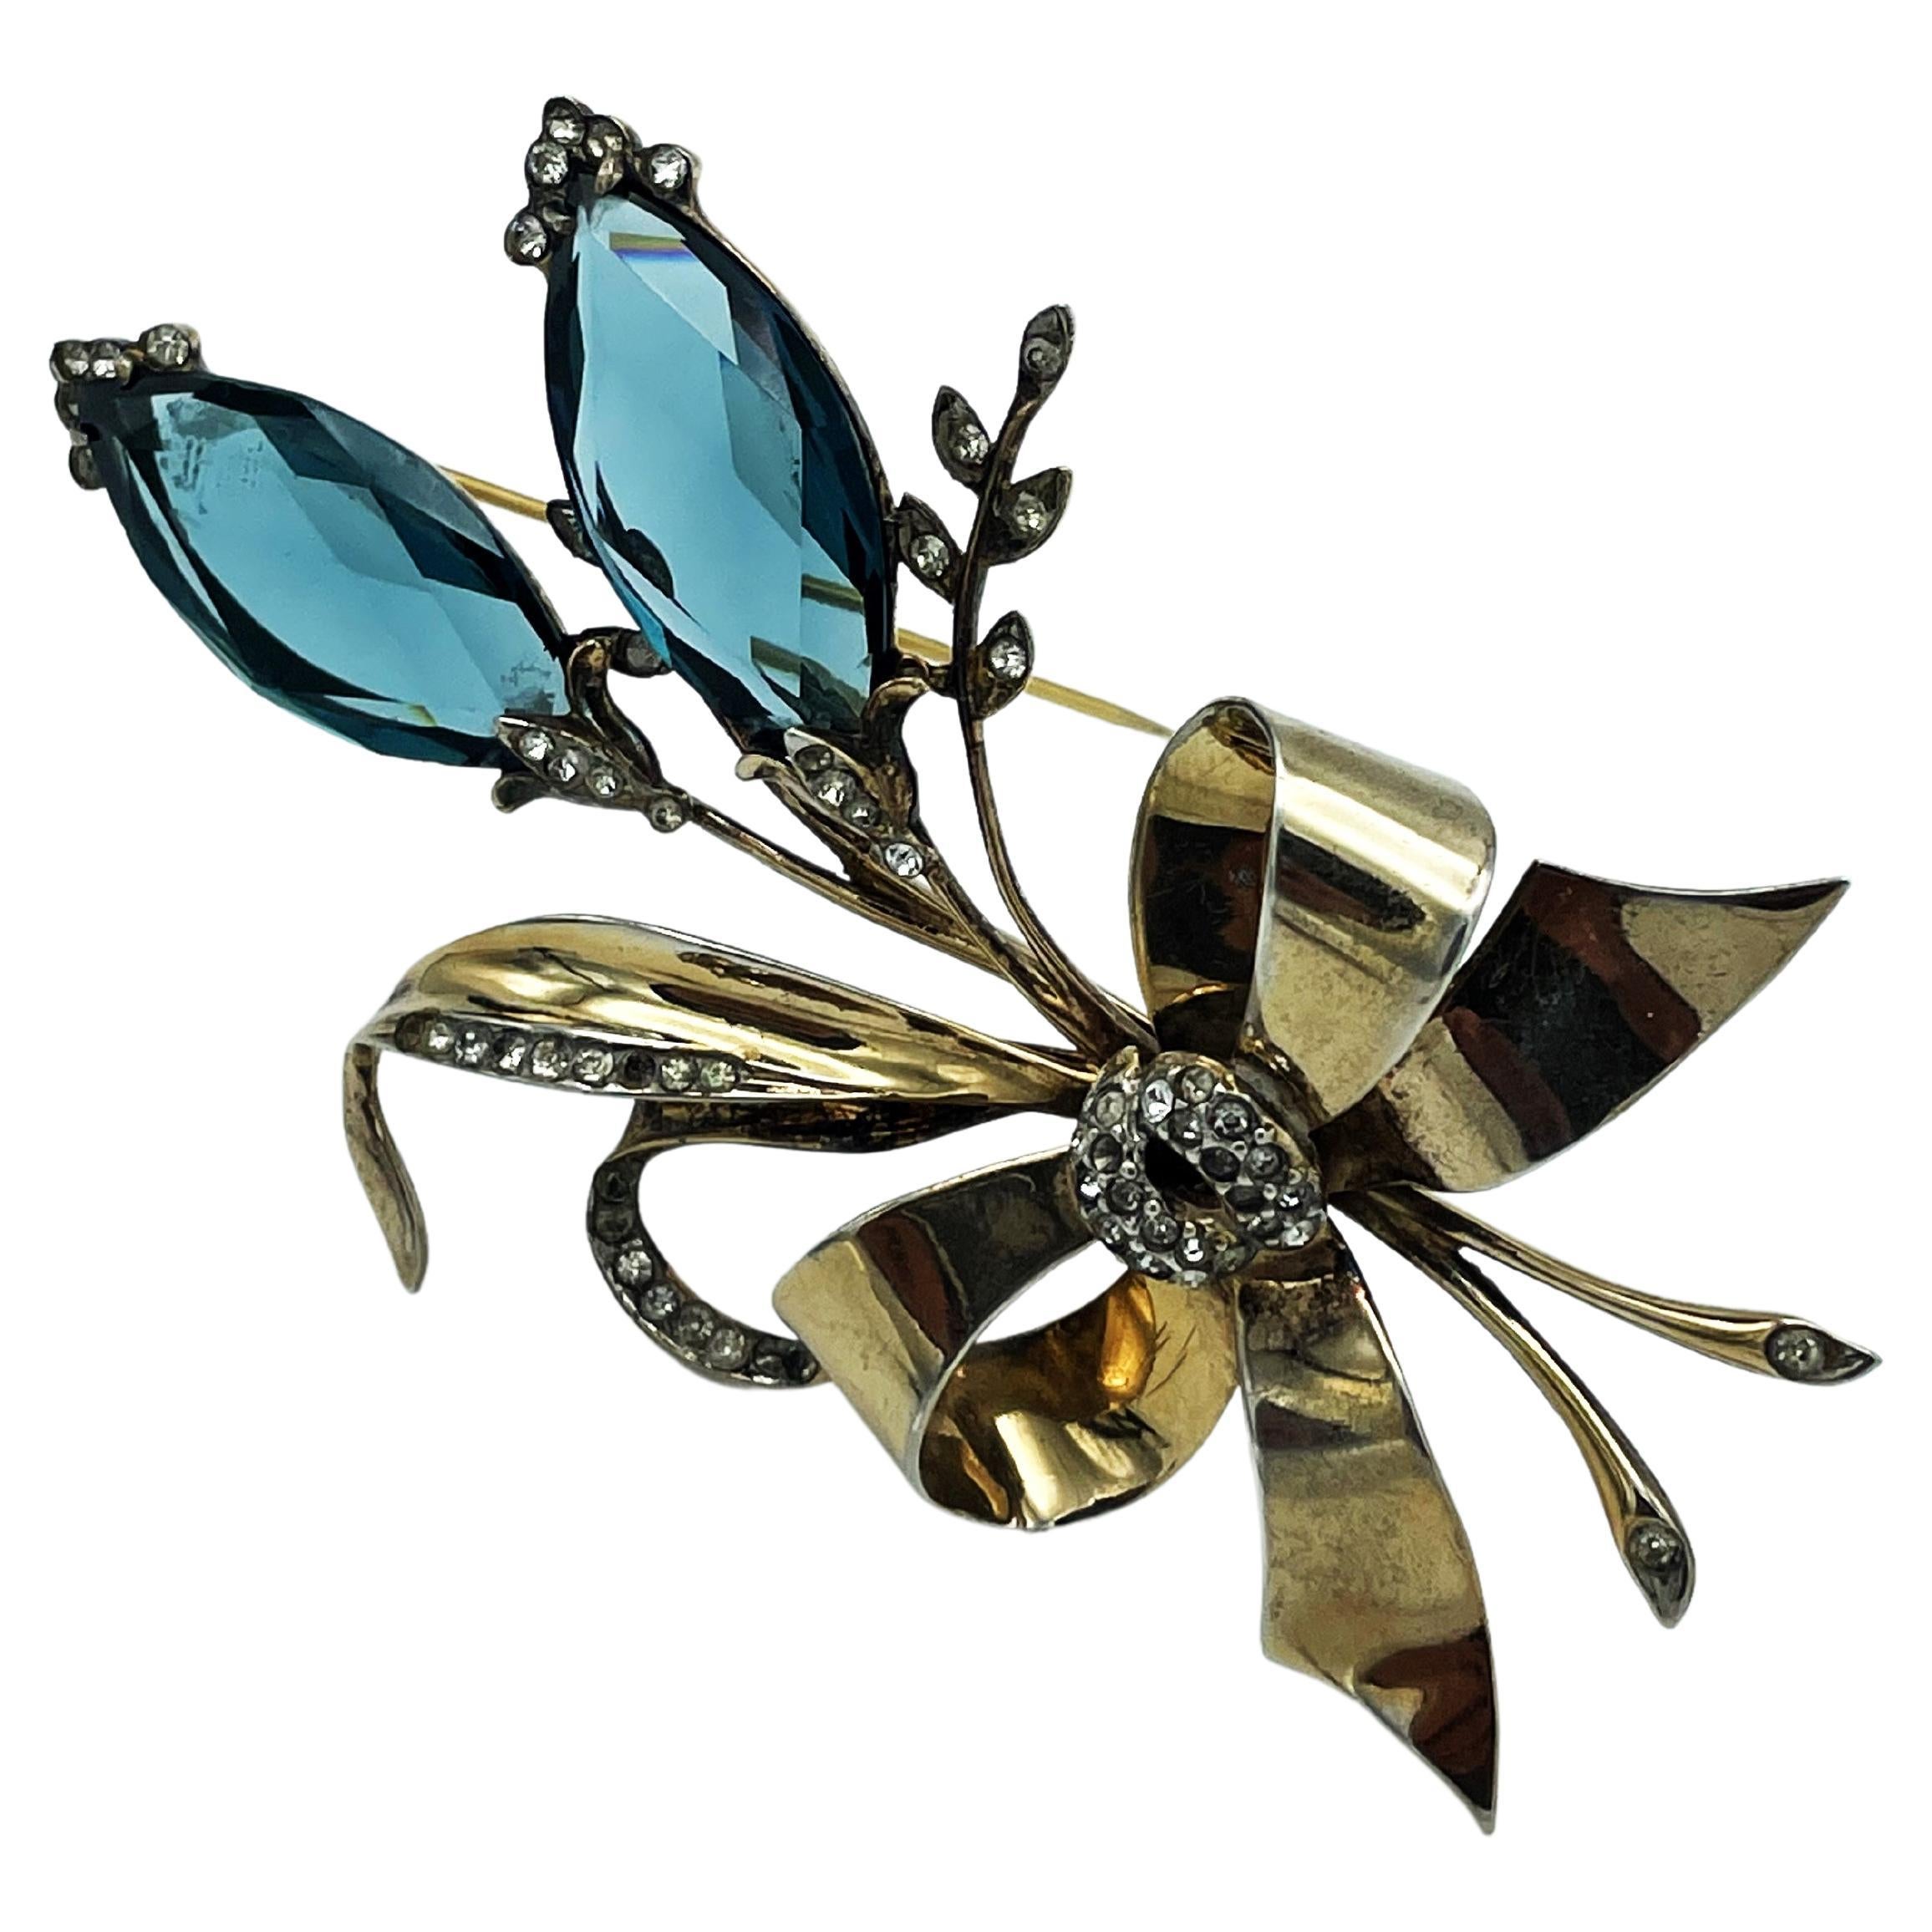   BLOOMING
THE BROOCH CELEBRATES ITS COMEBACK AND LETS OUTFITS SHINE!

Decorative brooch by the Stern-Kreisler Jewelry Company NY.
Founded in 1914 in New York by Marcus Stern and Jacques Kreisler.

Measurement: Height  10 cm, Width 6 cm 
- The